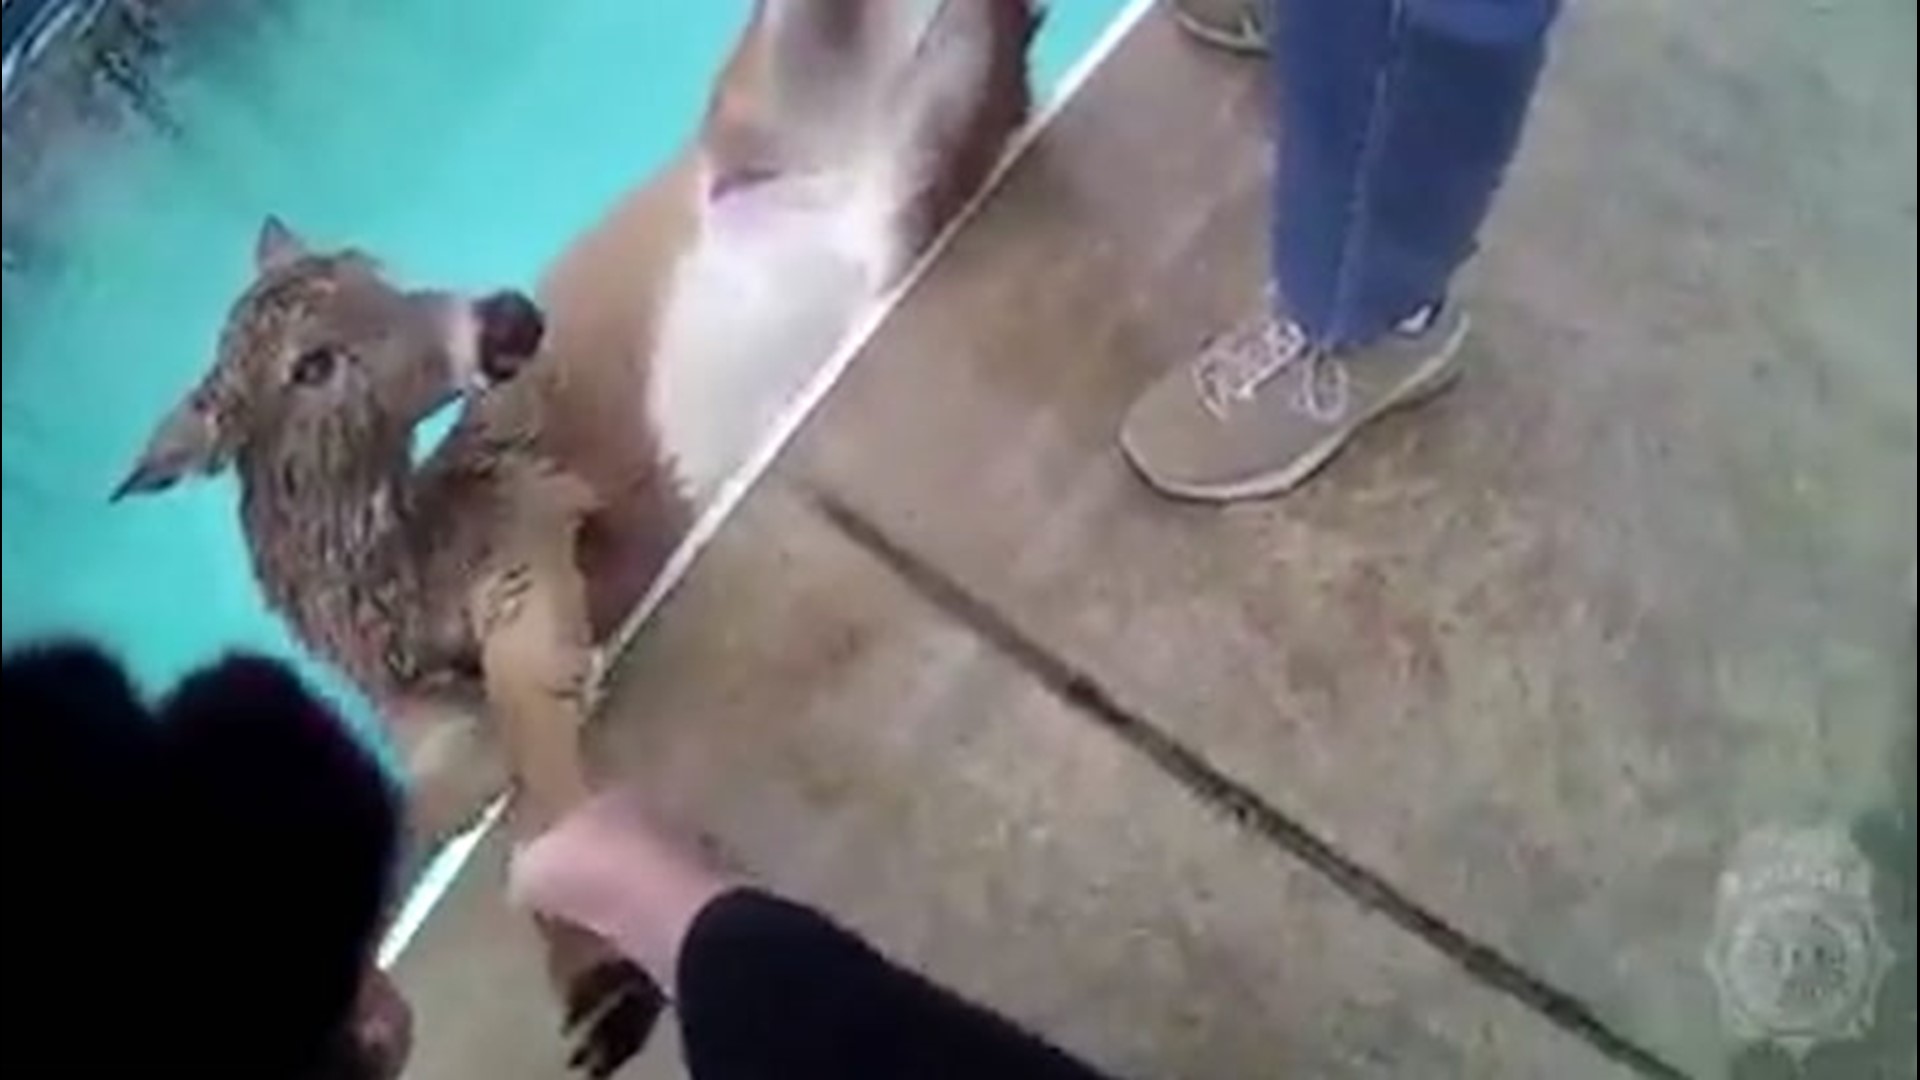 Police officers rescued this deer from an icy cold swimming pool in Fayette County, Kentucky, on Jan. 20. Temperatures were around 18 degrees Fahrenheit.